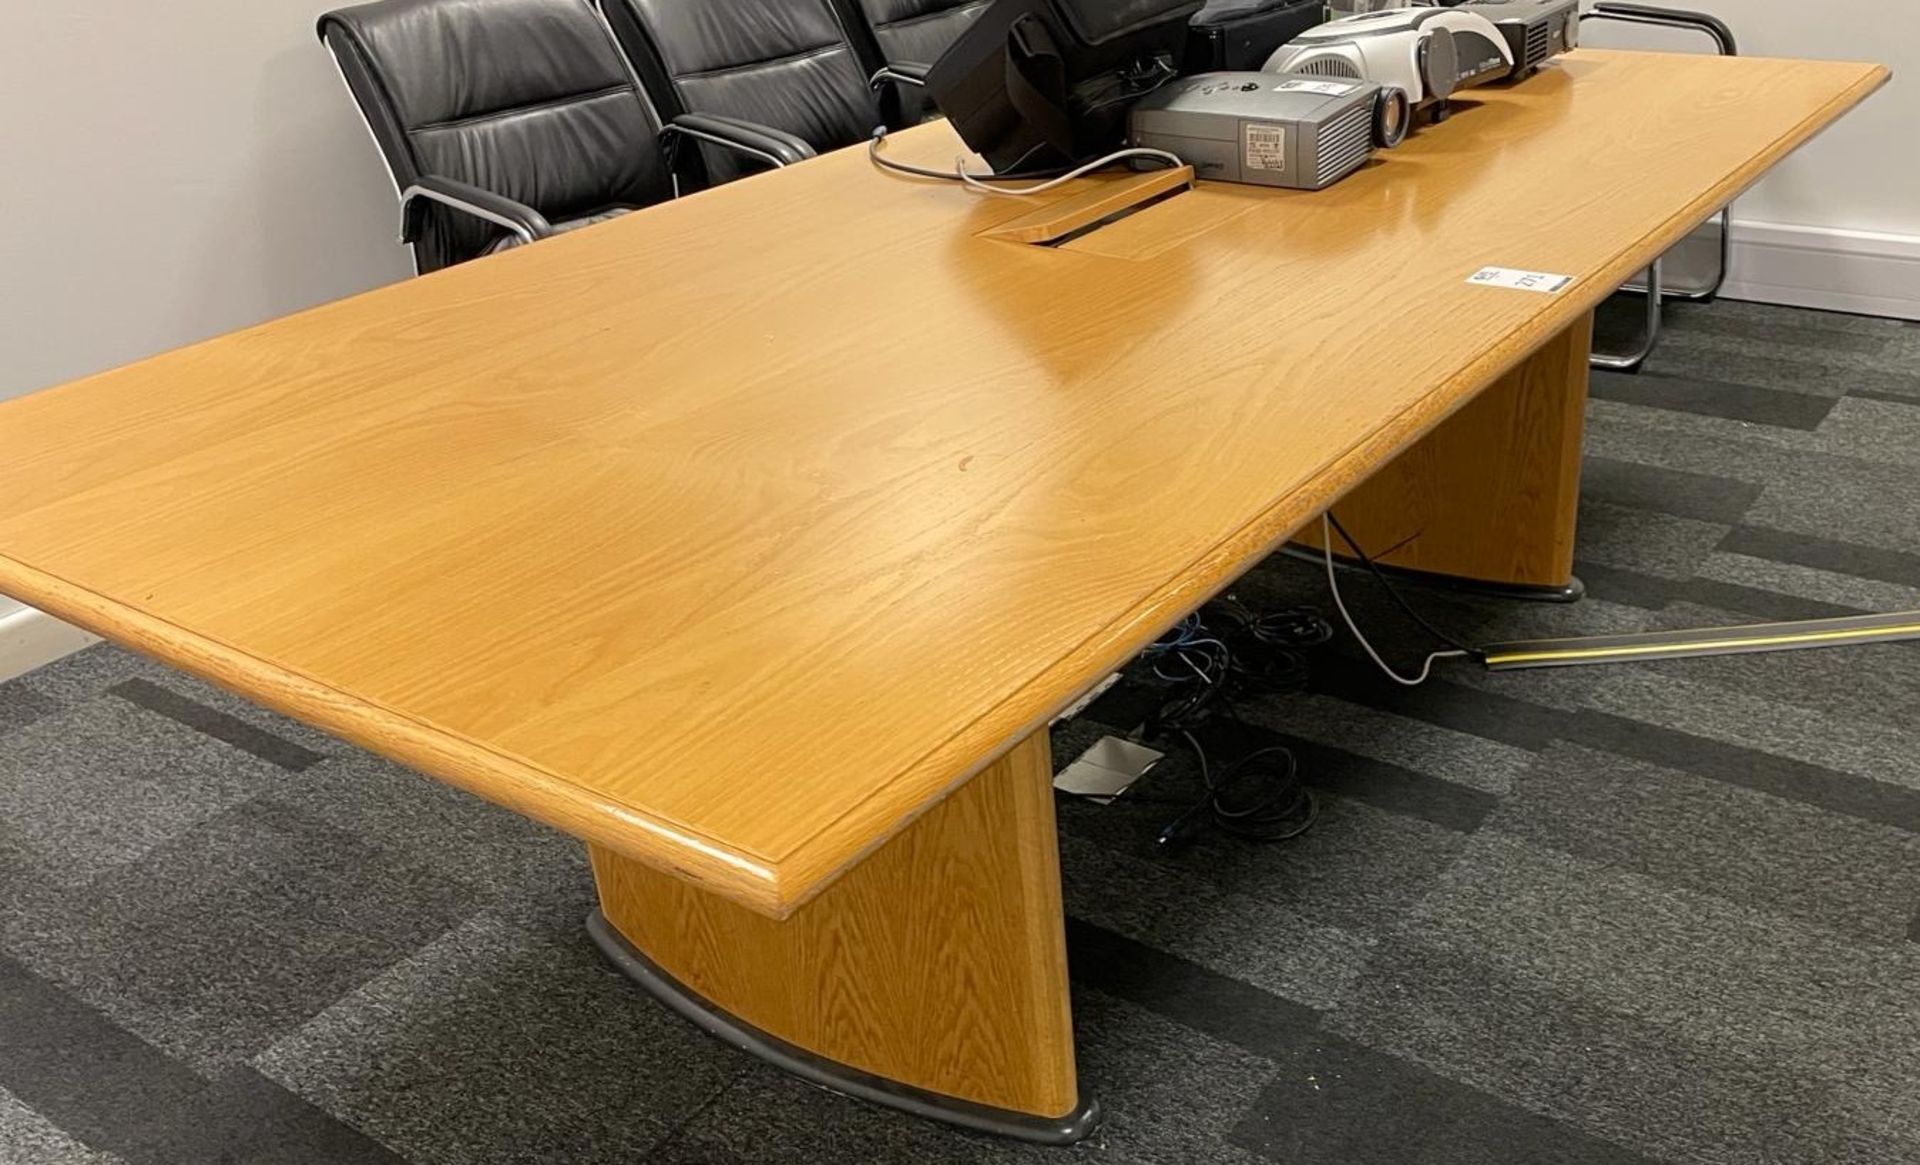 Light Oak Effect Boardroom Table (Located Rugby. Please Refer to General Notes)